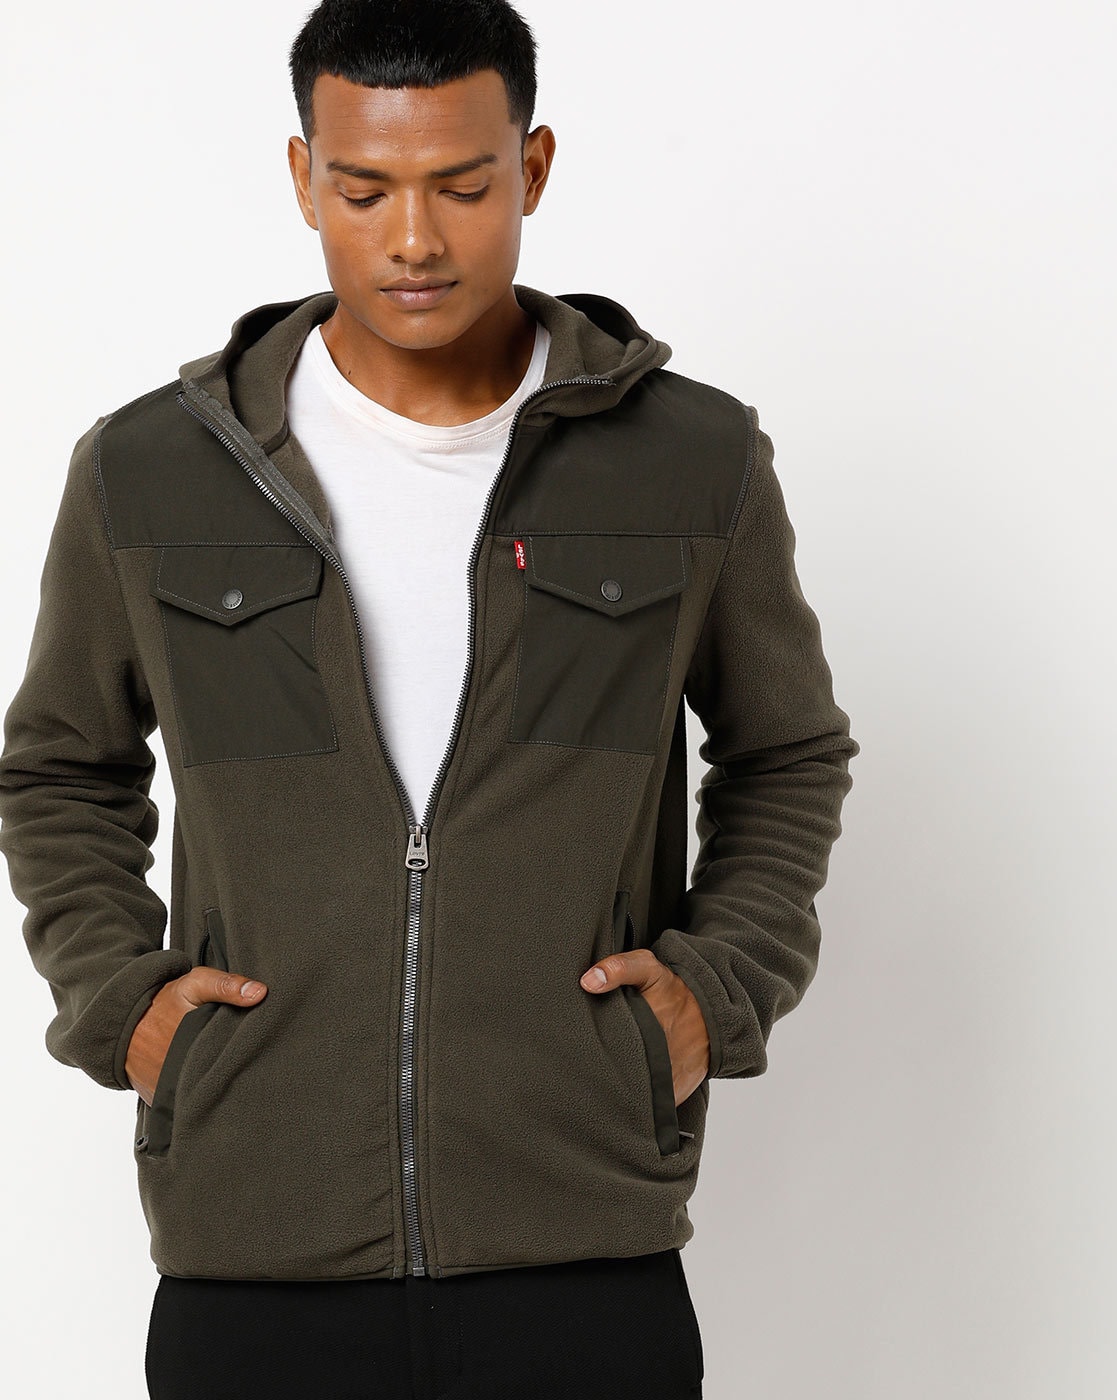 Buy Olive Green Jackets & Coats for Men by LEVIS Online 